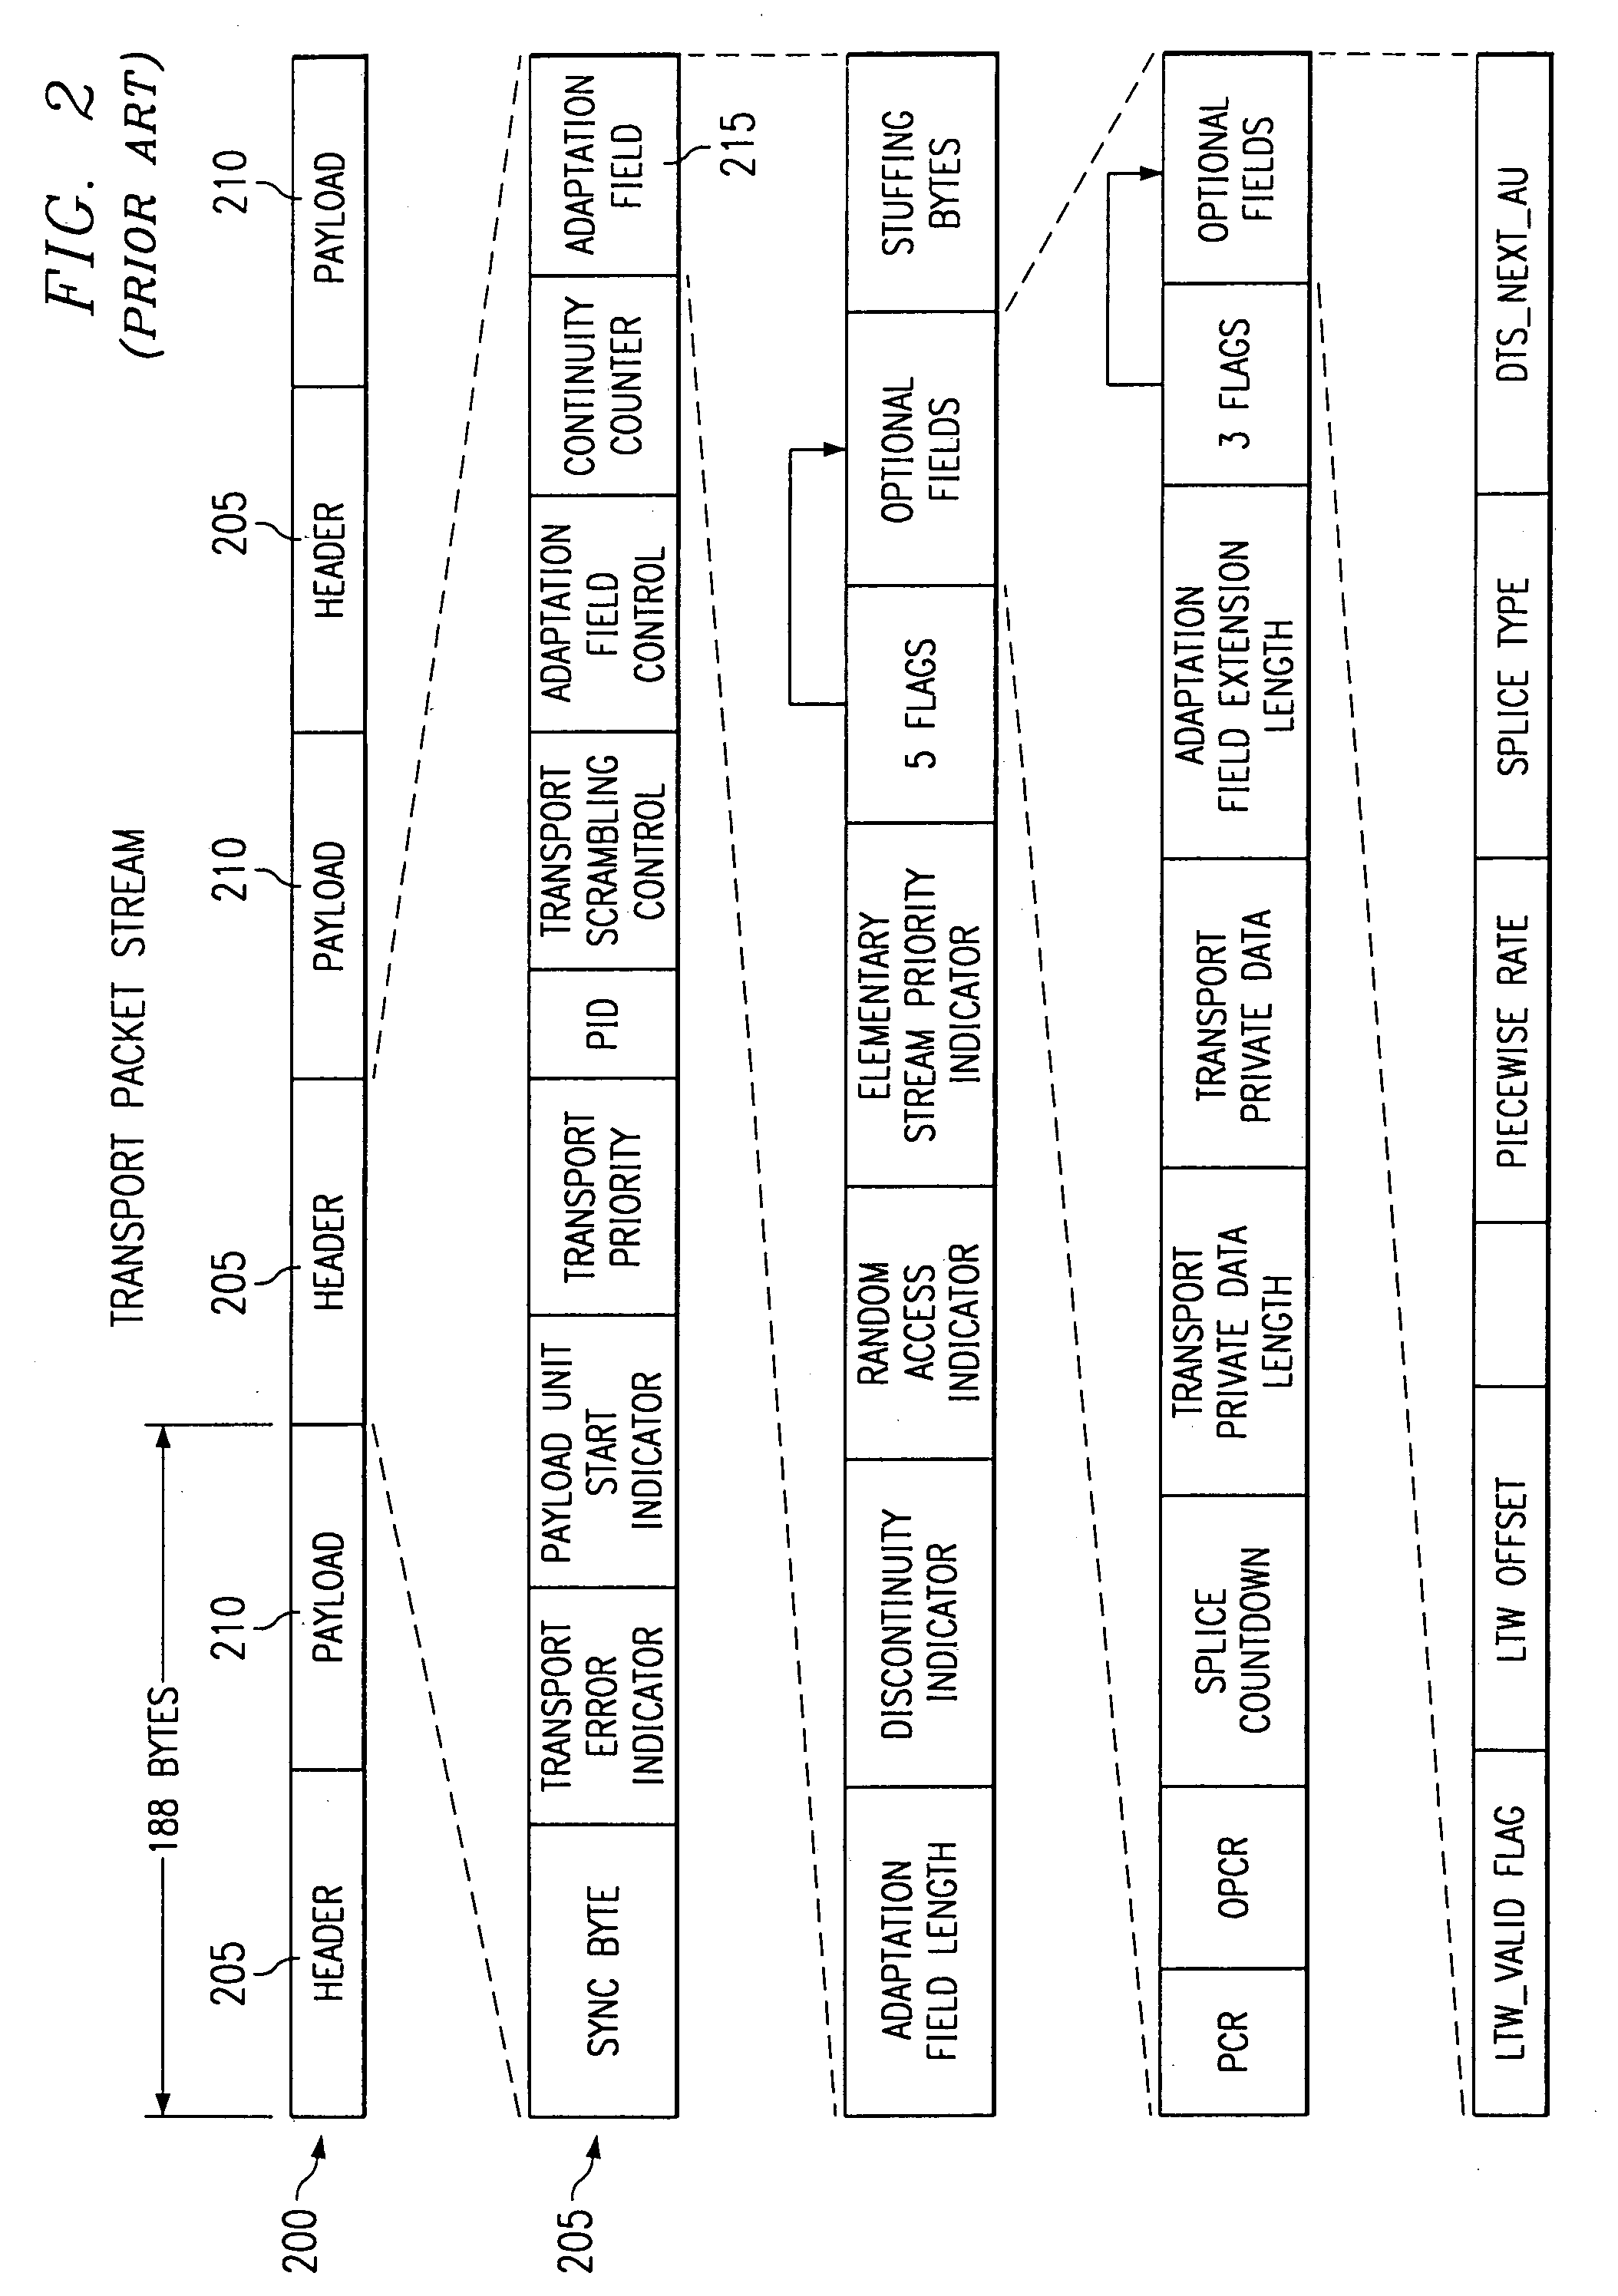 Apparatus and method for indexing MPEG video data to perform special mode playback in a digital video recorder and indexed signal associated therewith